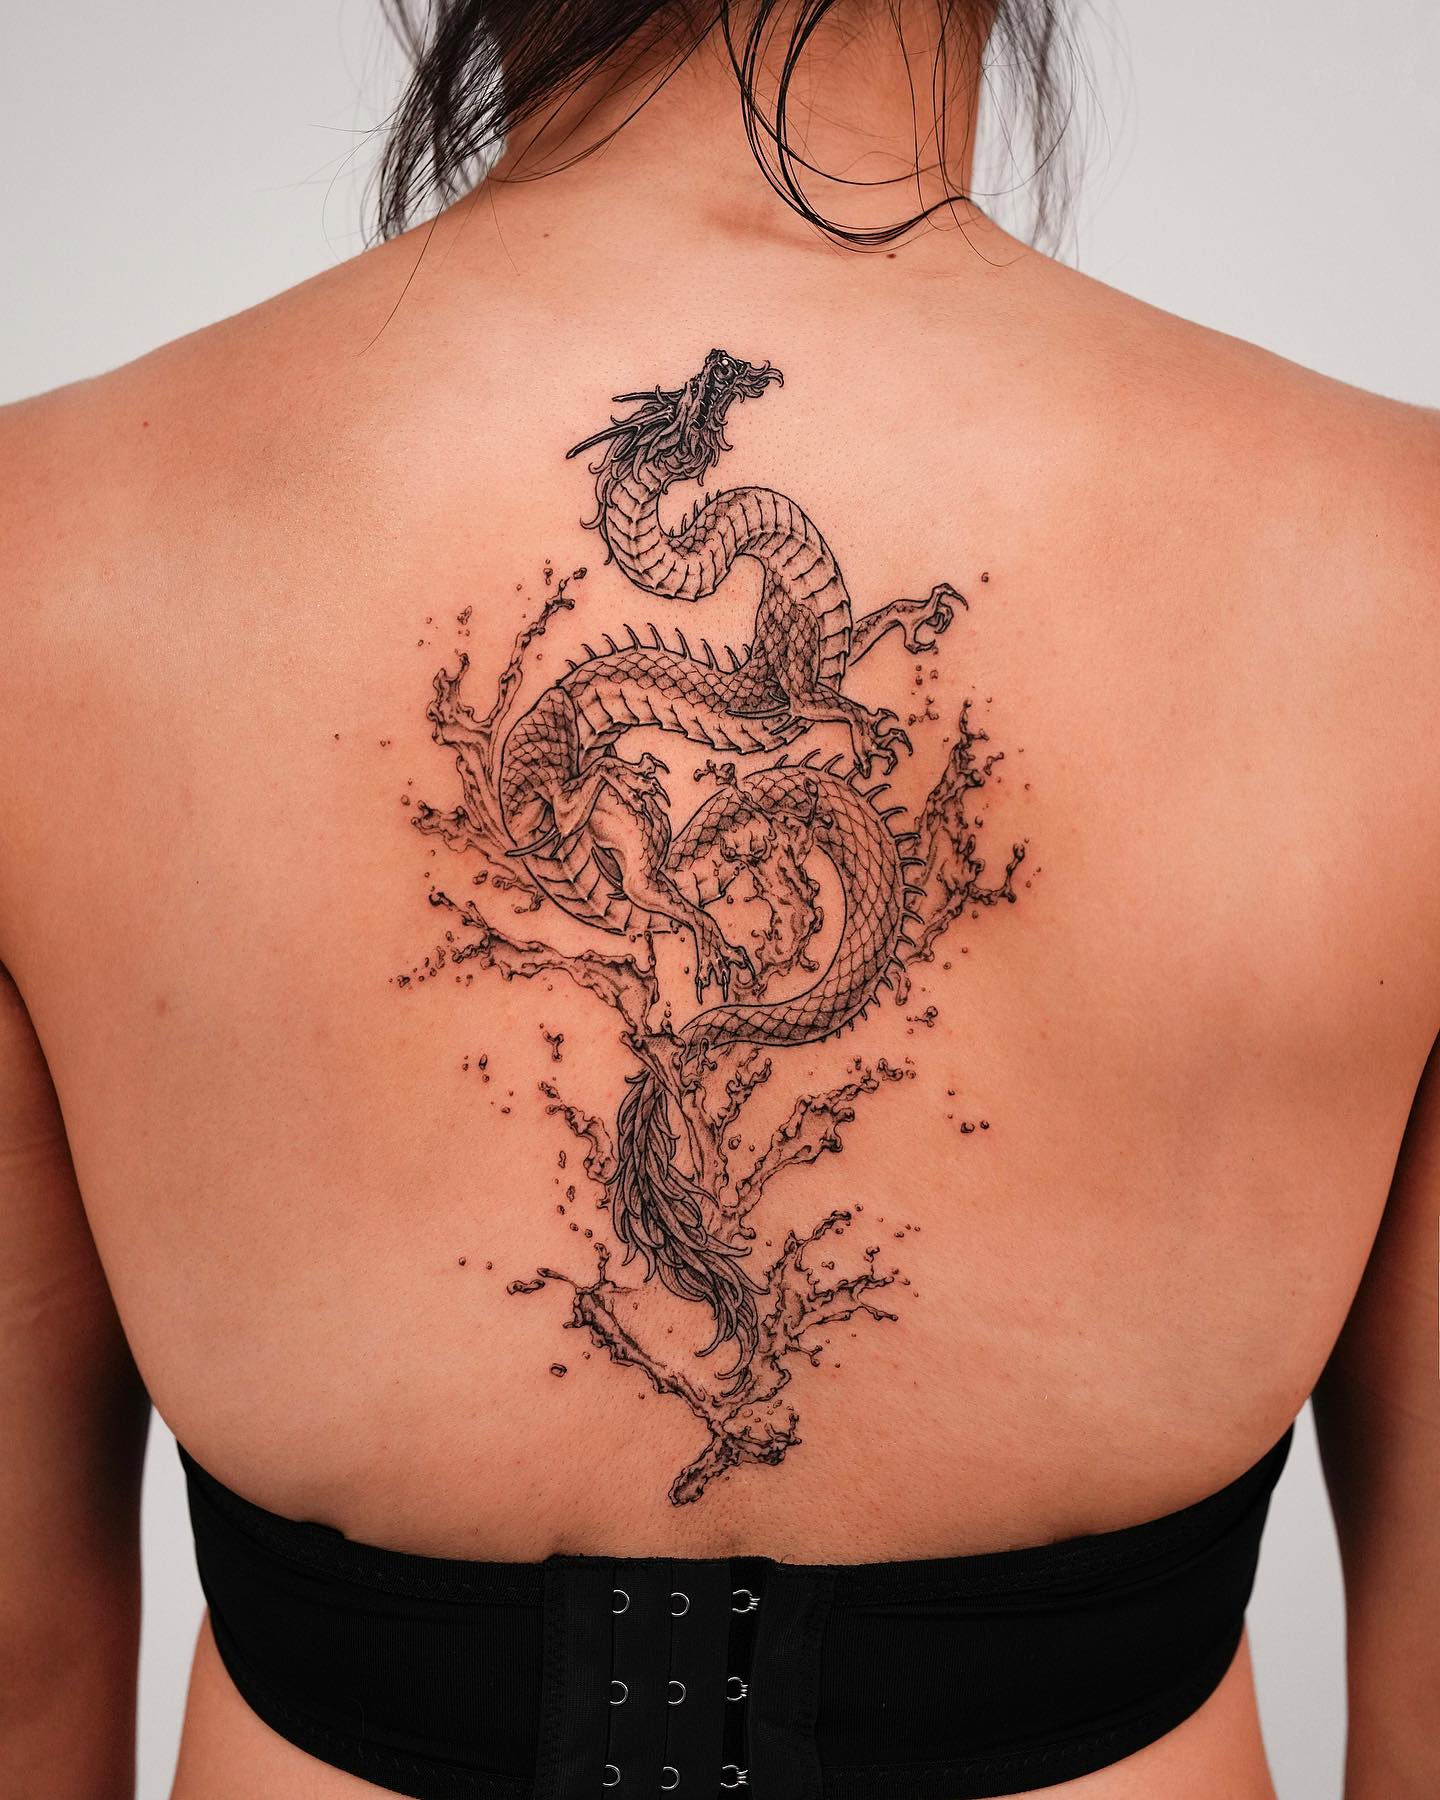 20+ Amazing Dragon Tattoo Ideas For Men And Women